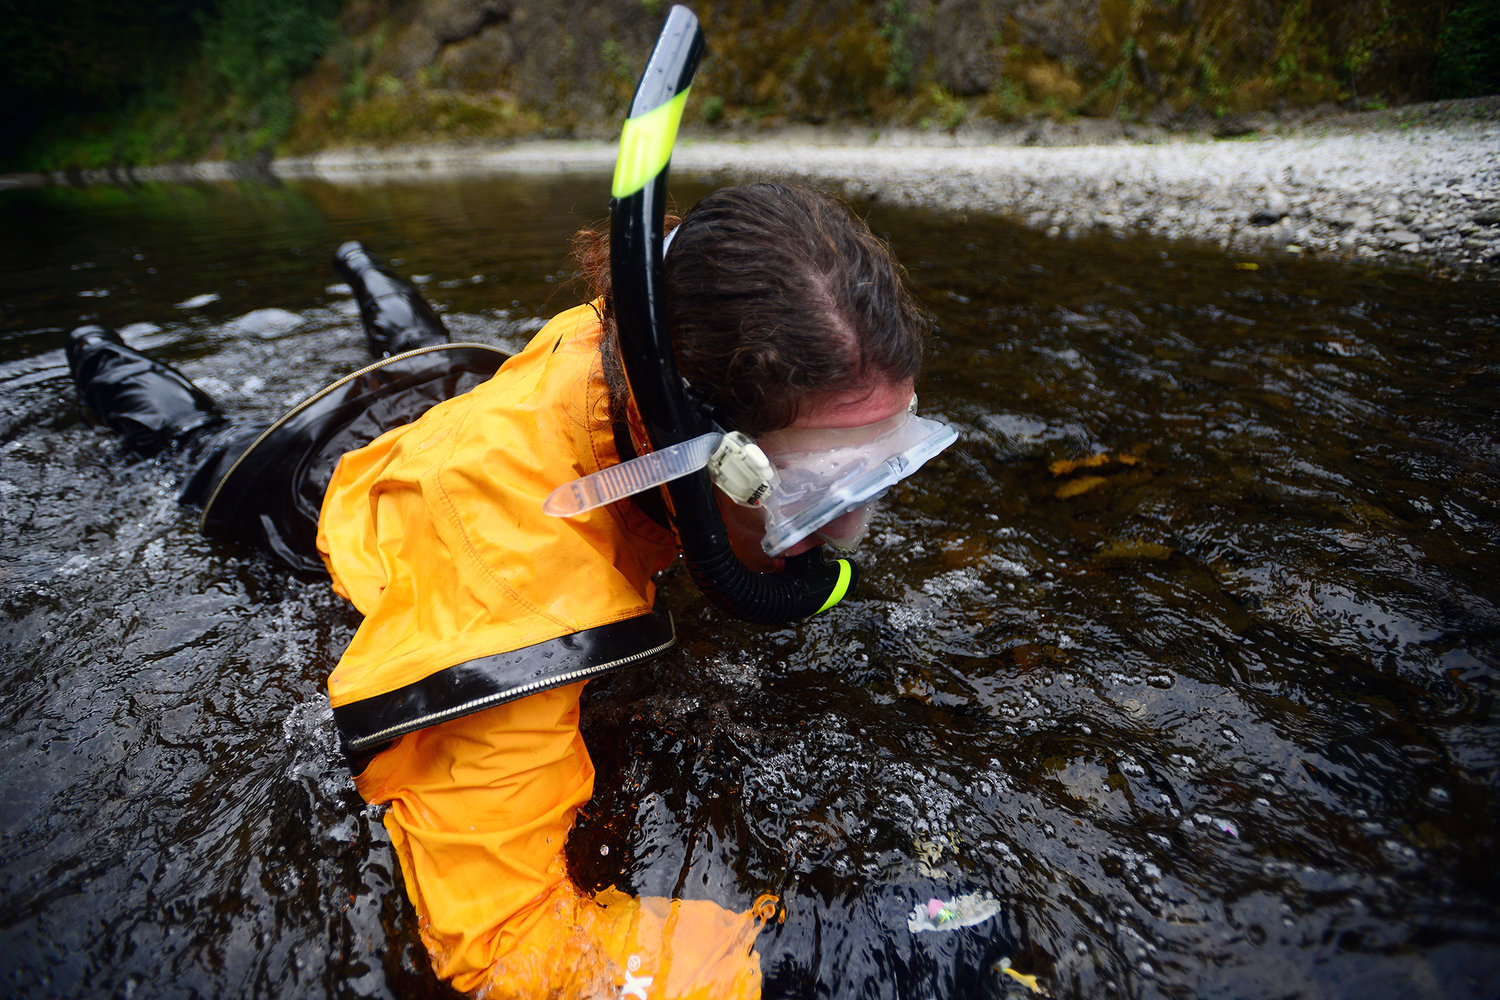 Washington Department of Wildlife employee Amy Edwards conducts a survey of the Chehalis River on Monday afternoon outside Pe Ell. Edwards, with snorkel gear on, was counting fish species in the river.